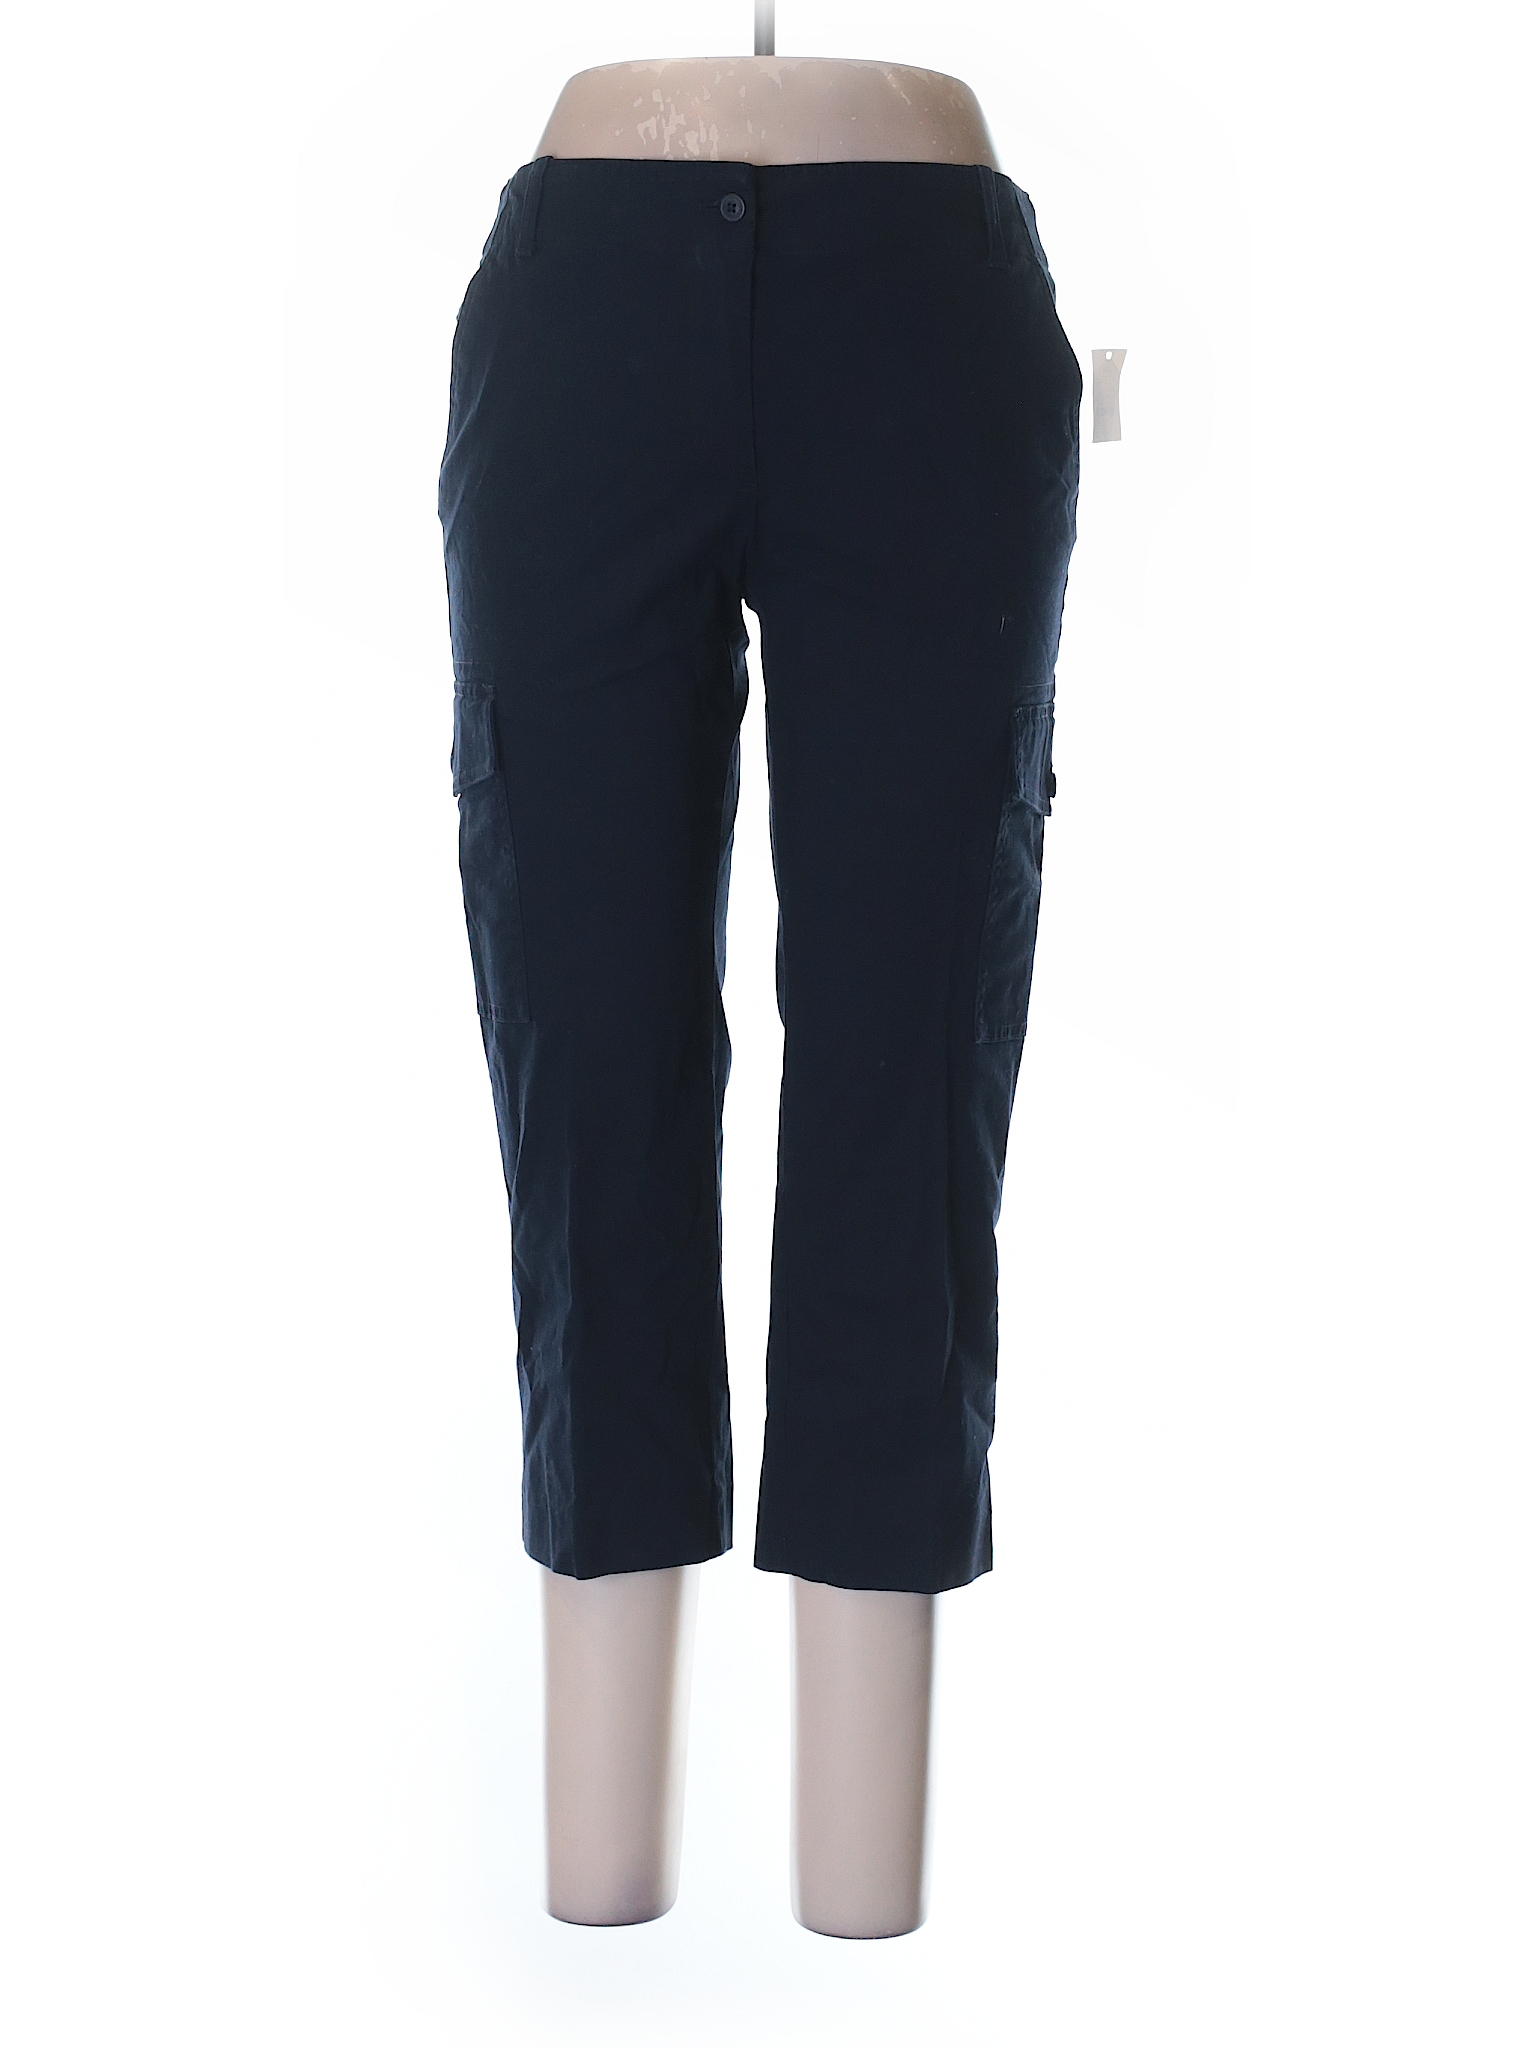 Talbots Outlet Cargo Pants - 66% off only on thredUP